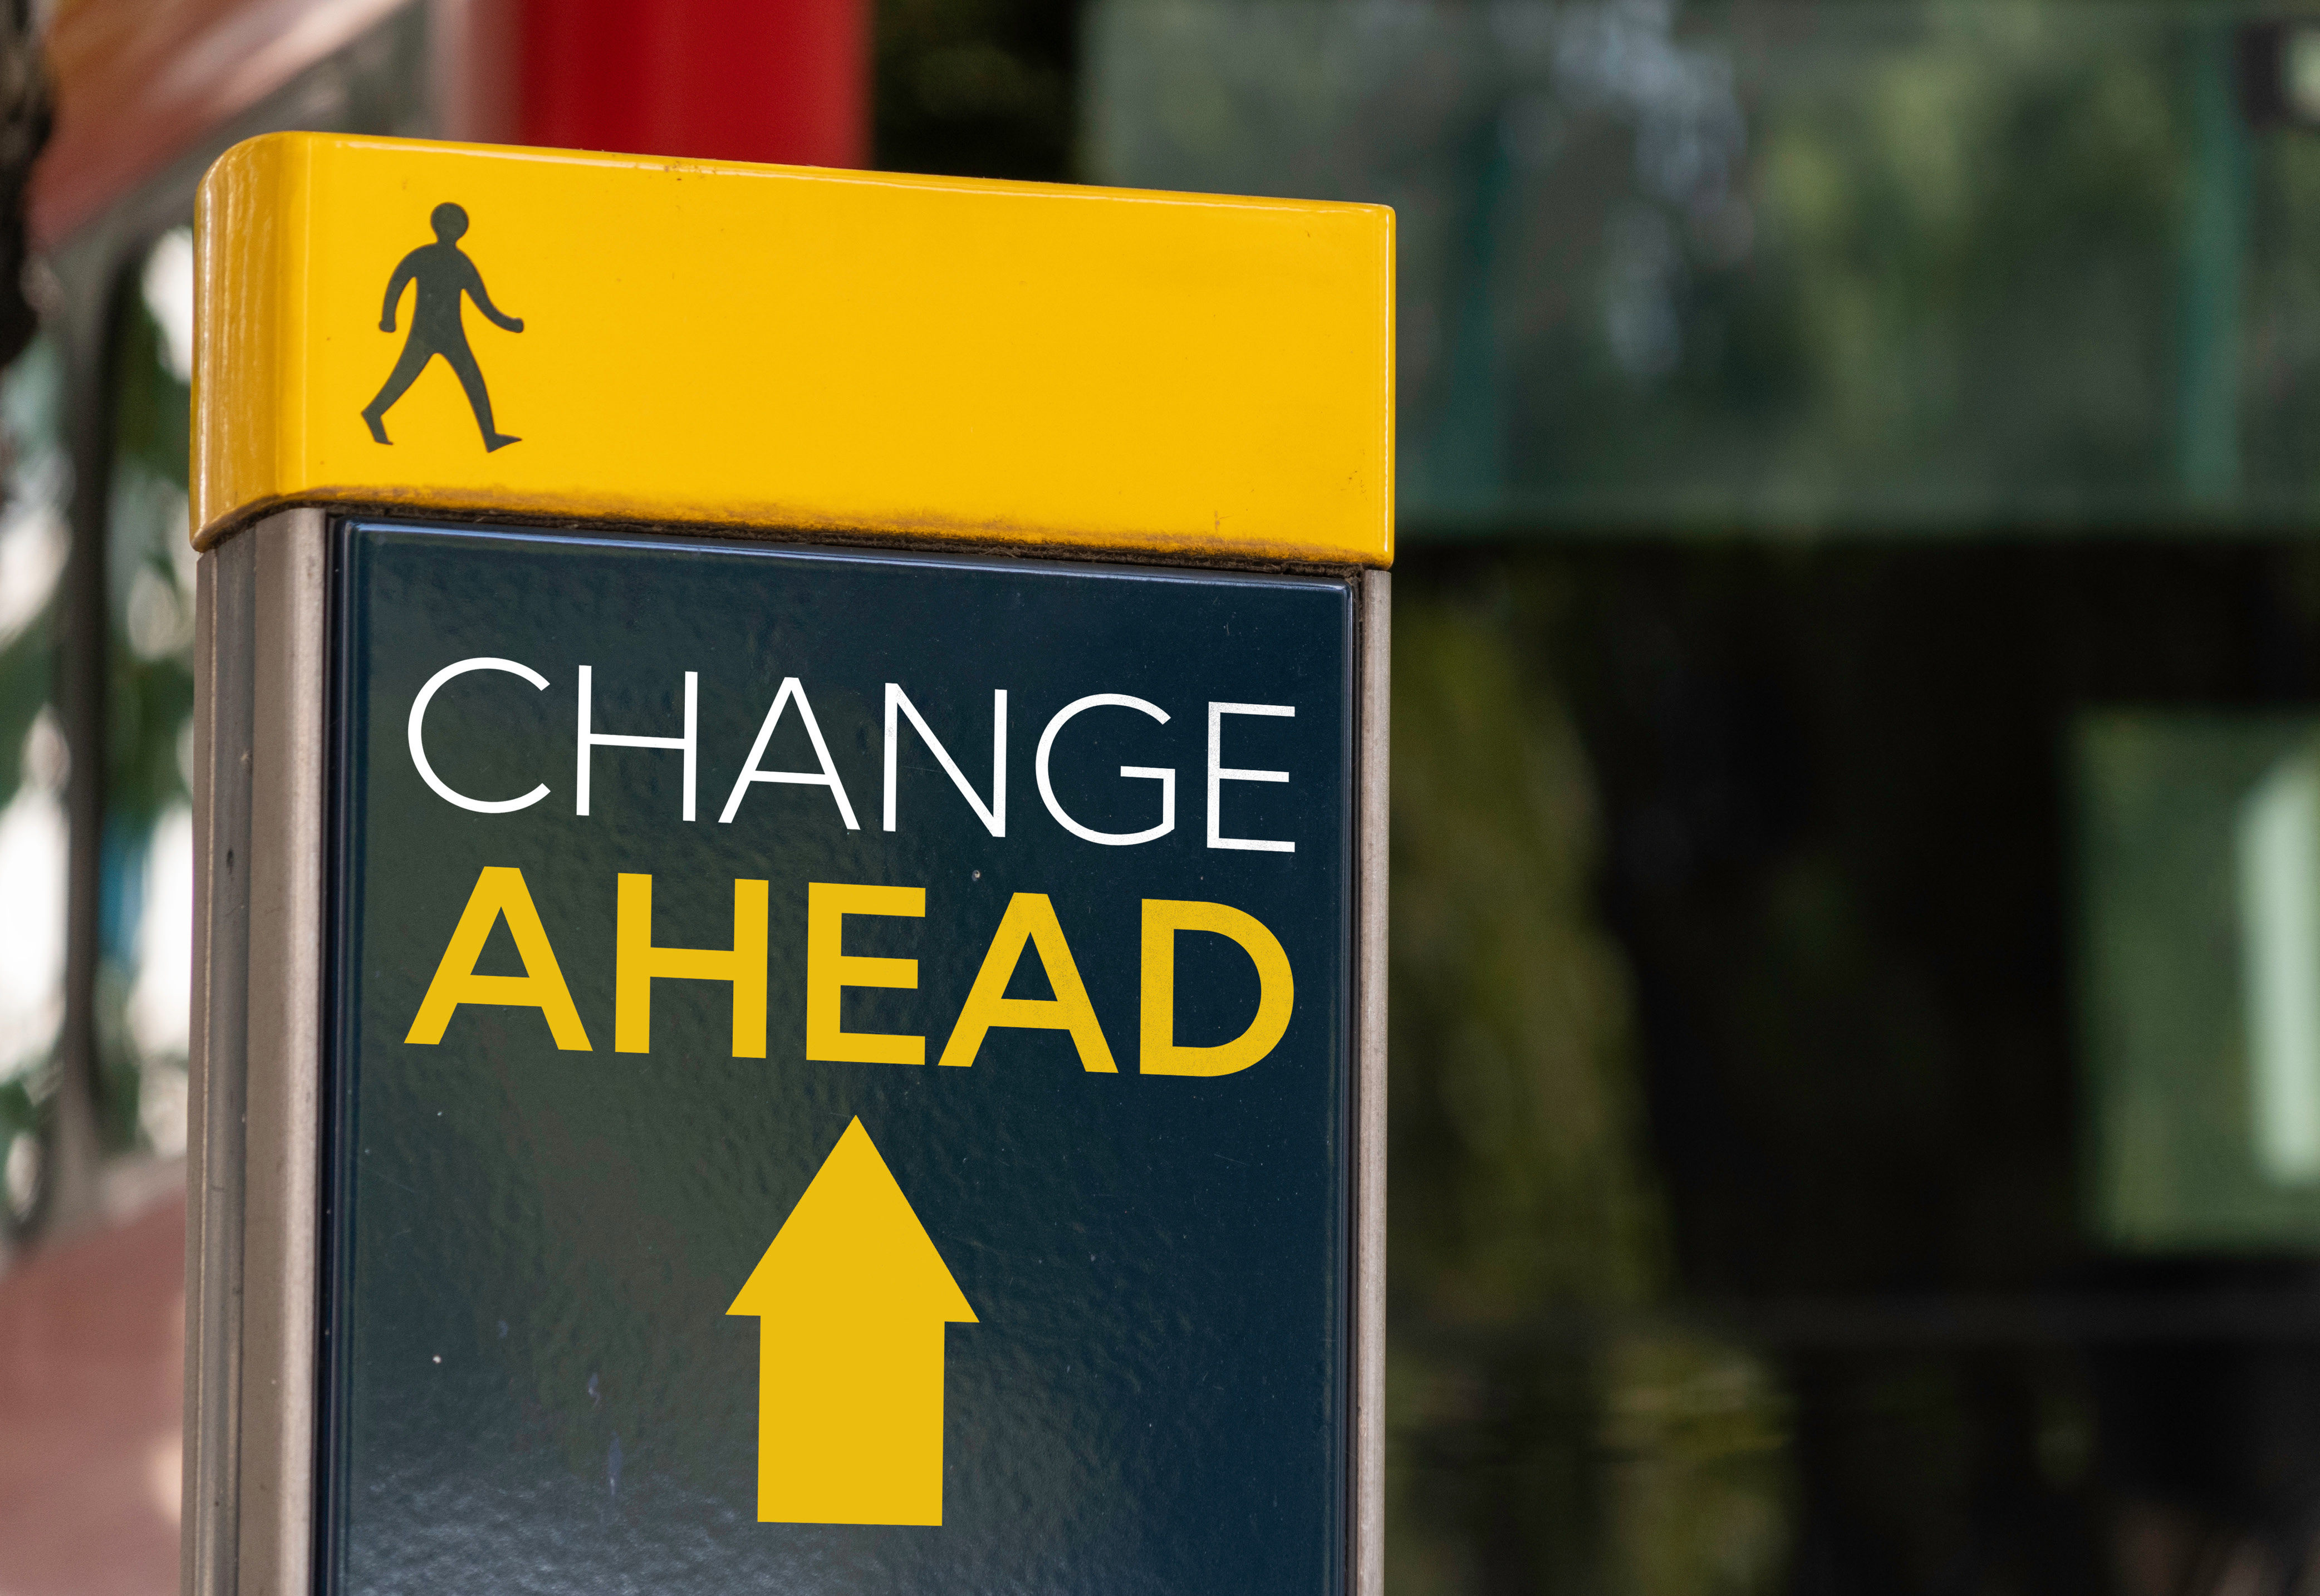 A black and yellow sign labeled, "Change Ahead" with an icon of a person walking and an arrow pointing forward